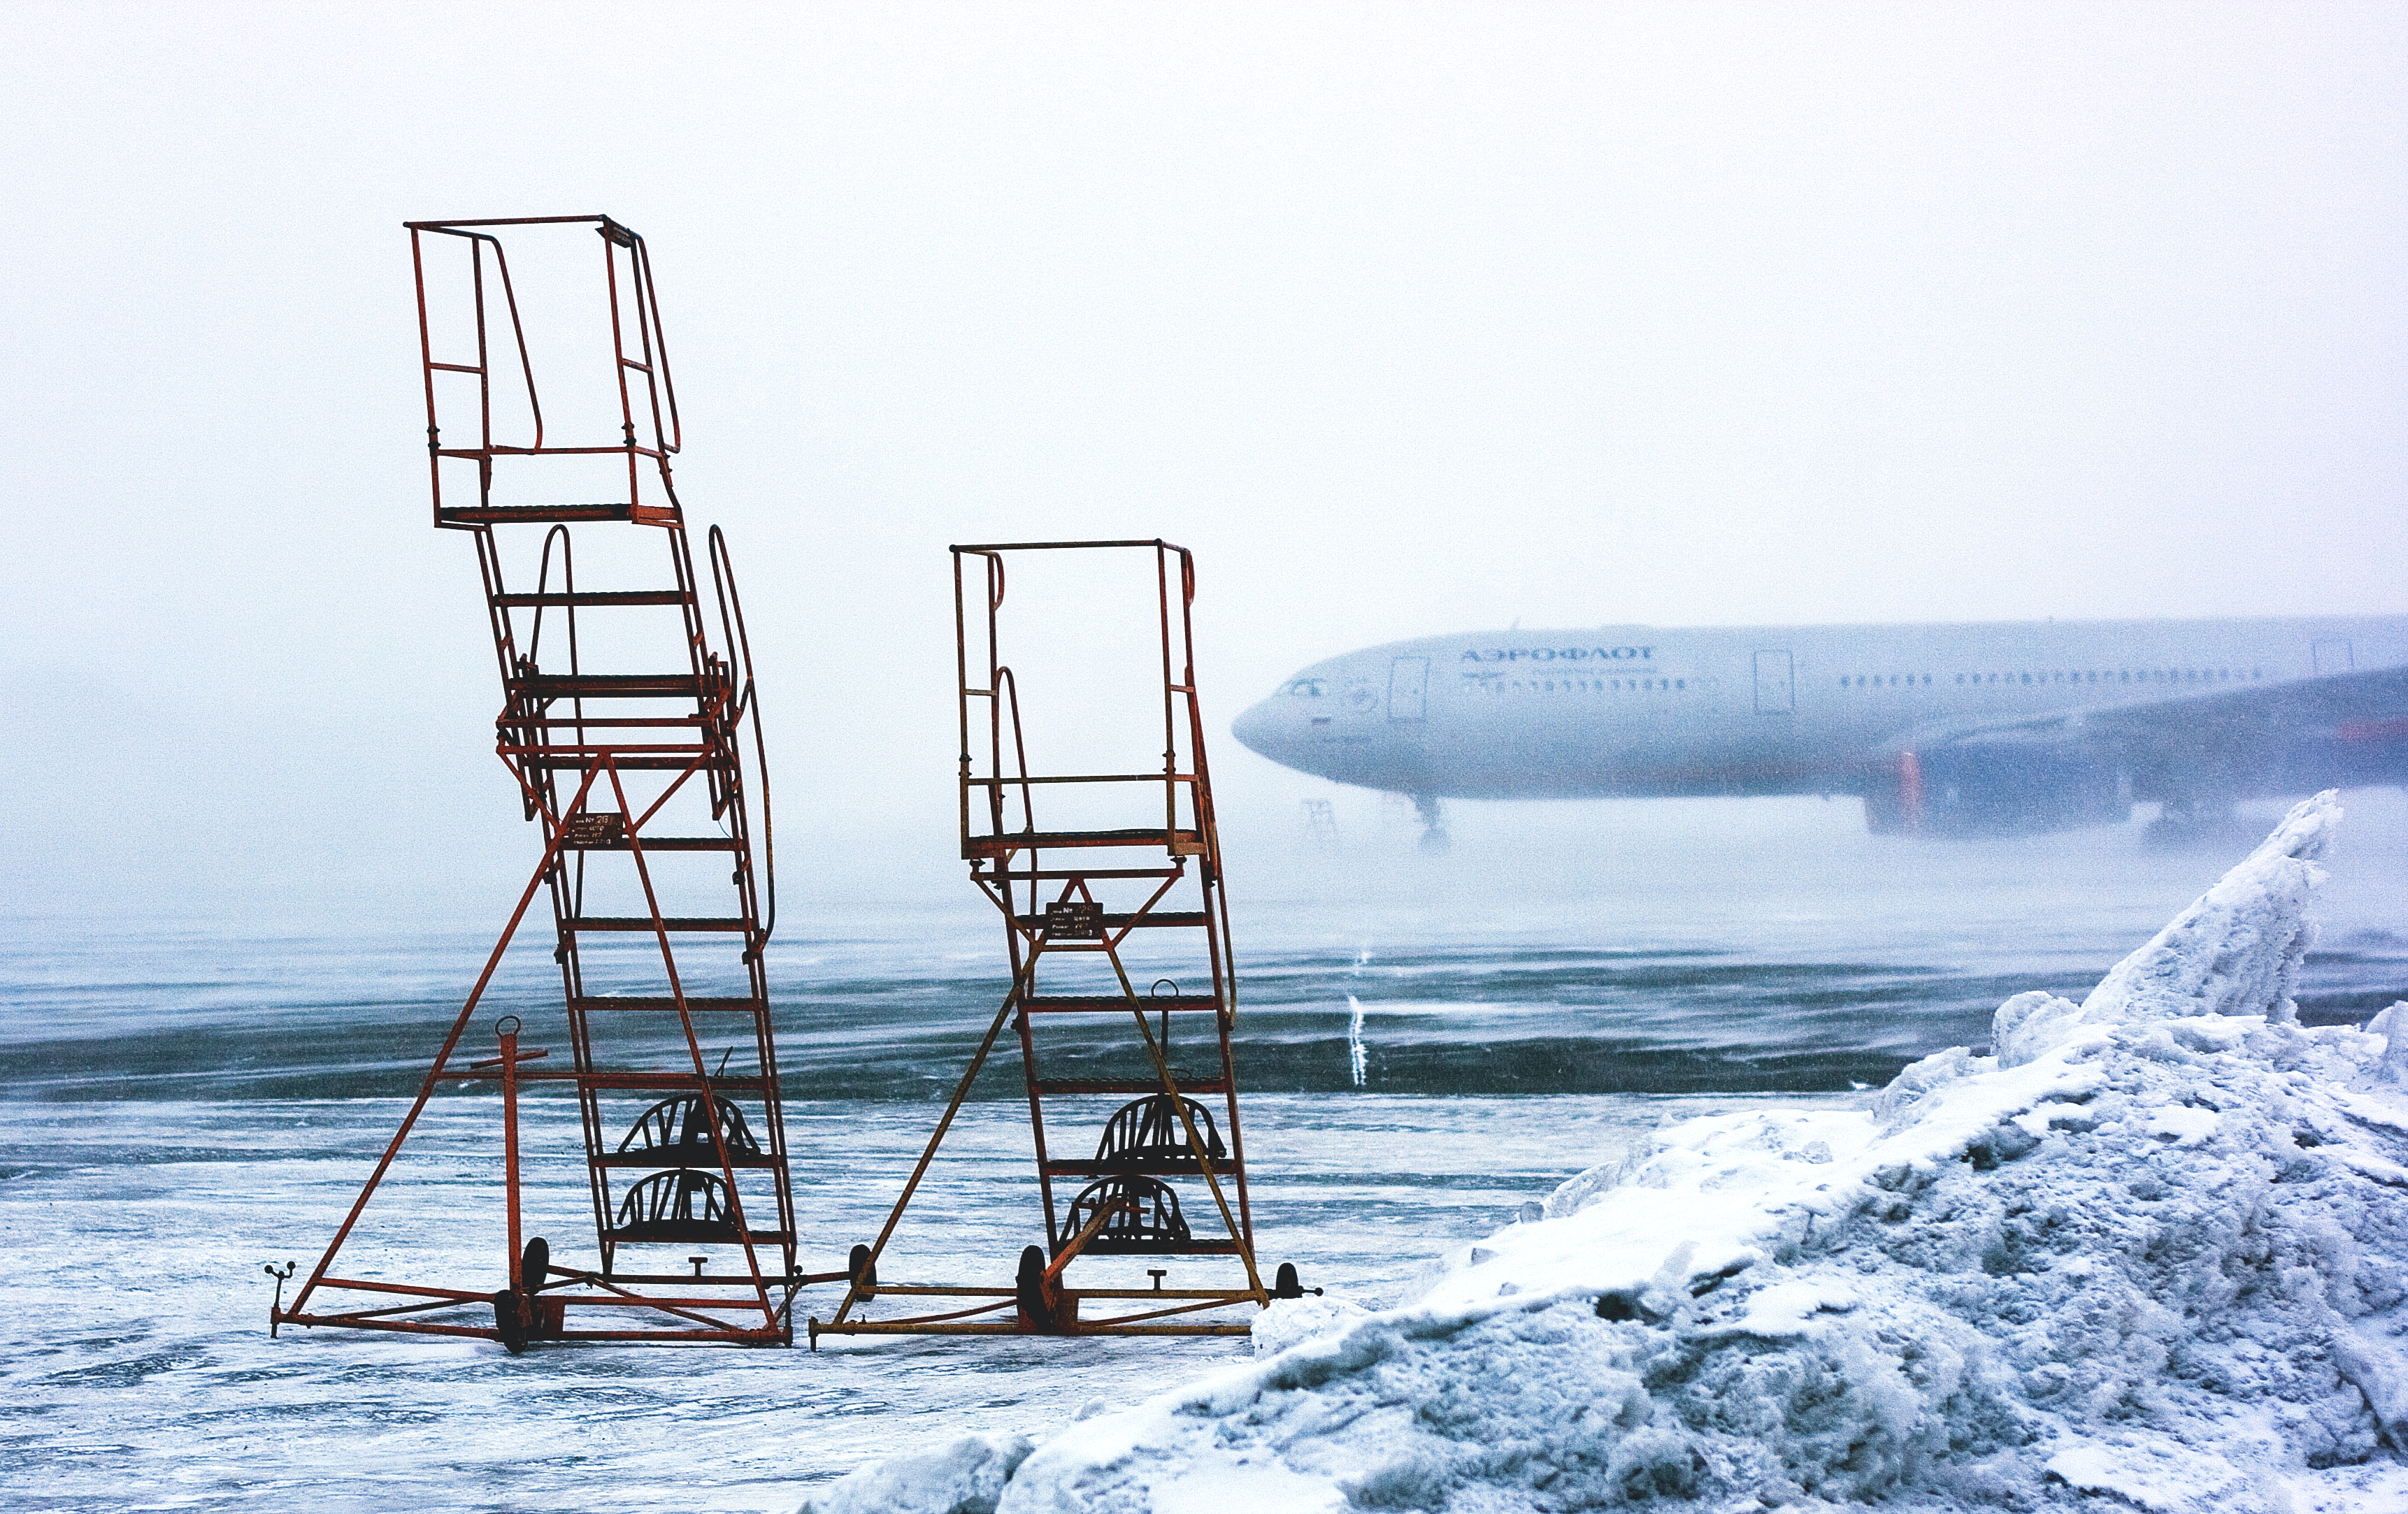 snowy airport